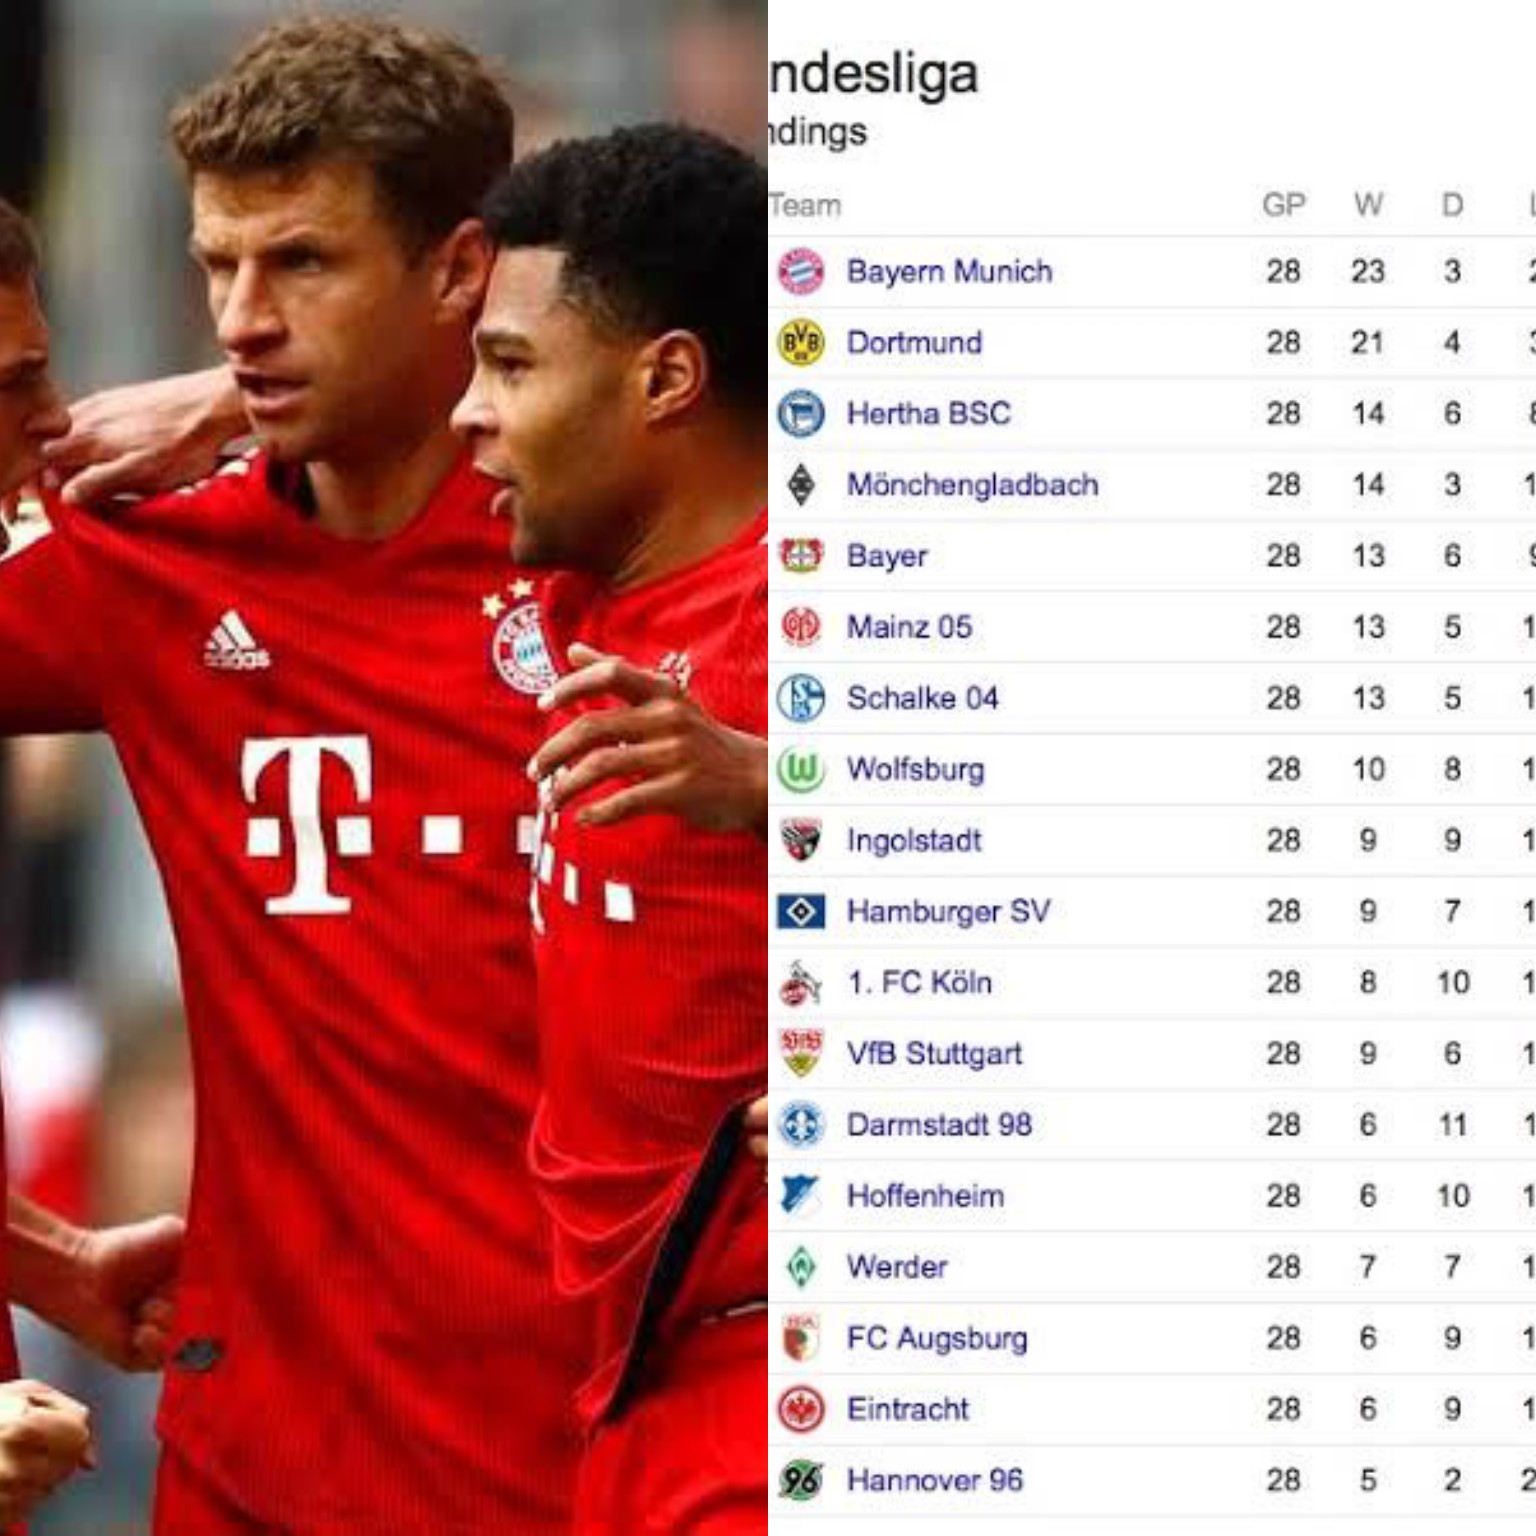 Bayern Munich Makes Their Way To First Position In Bundesliga Table